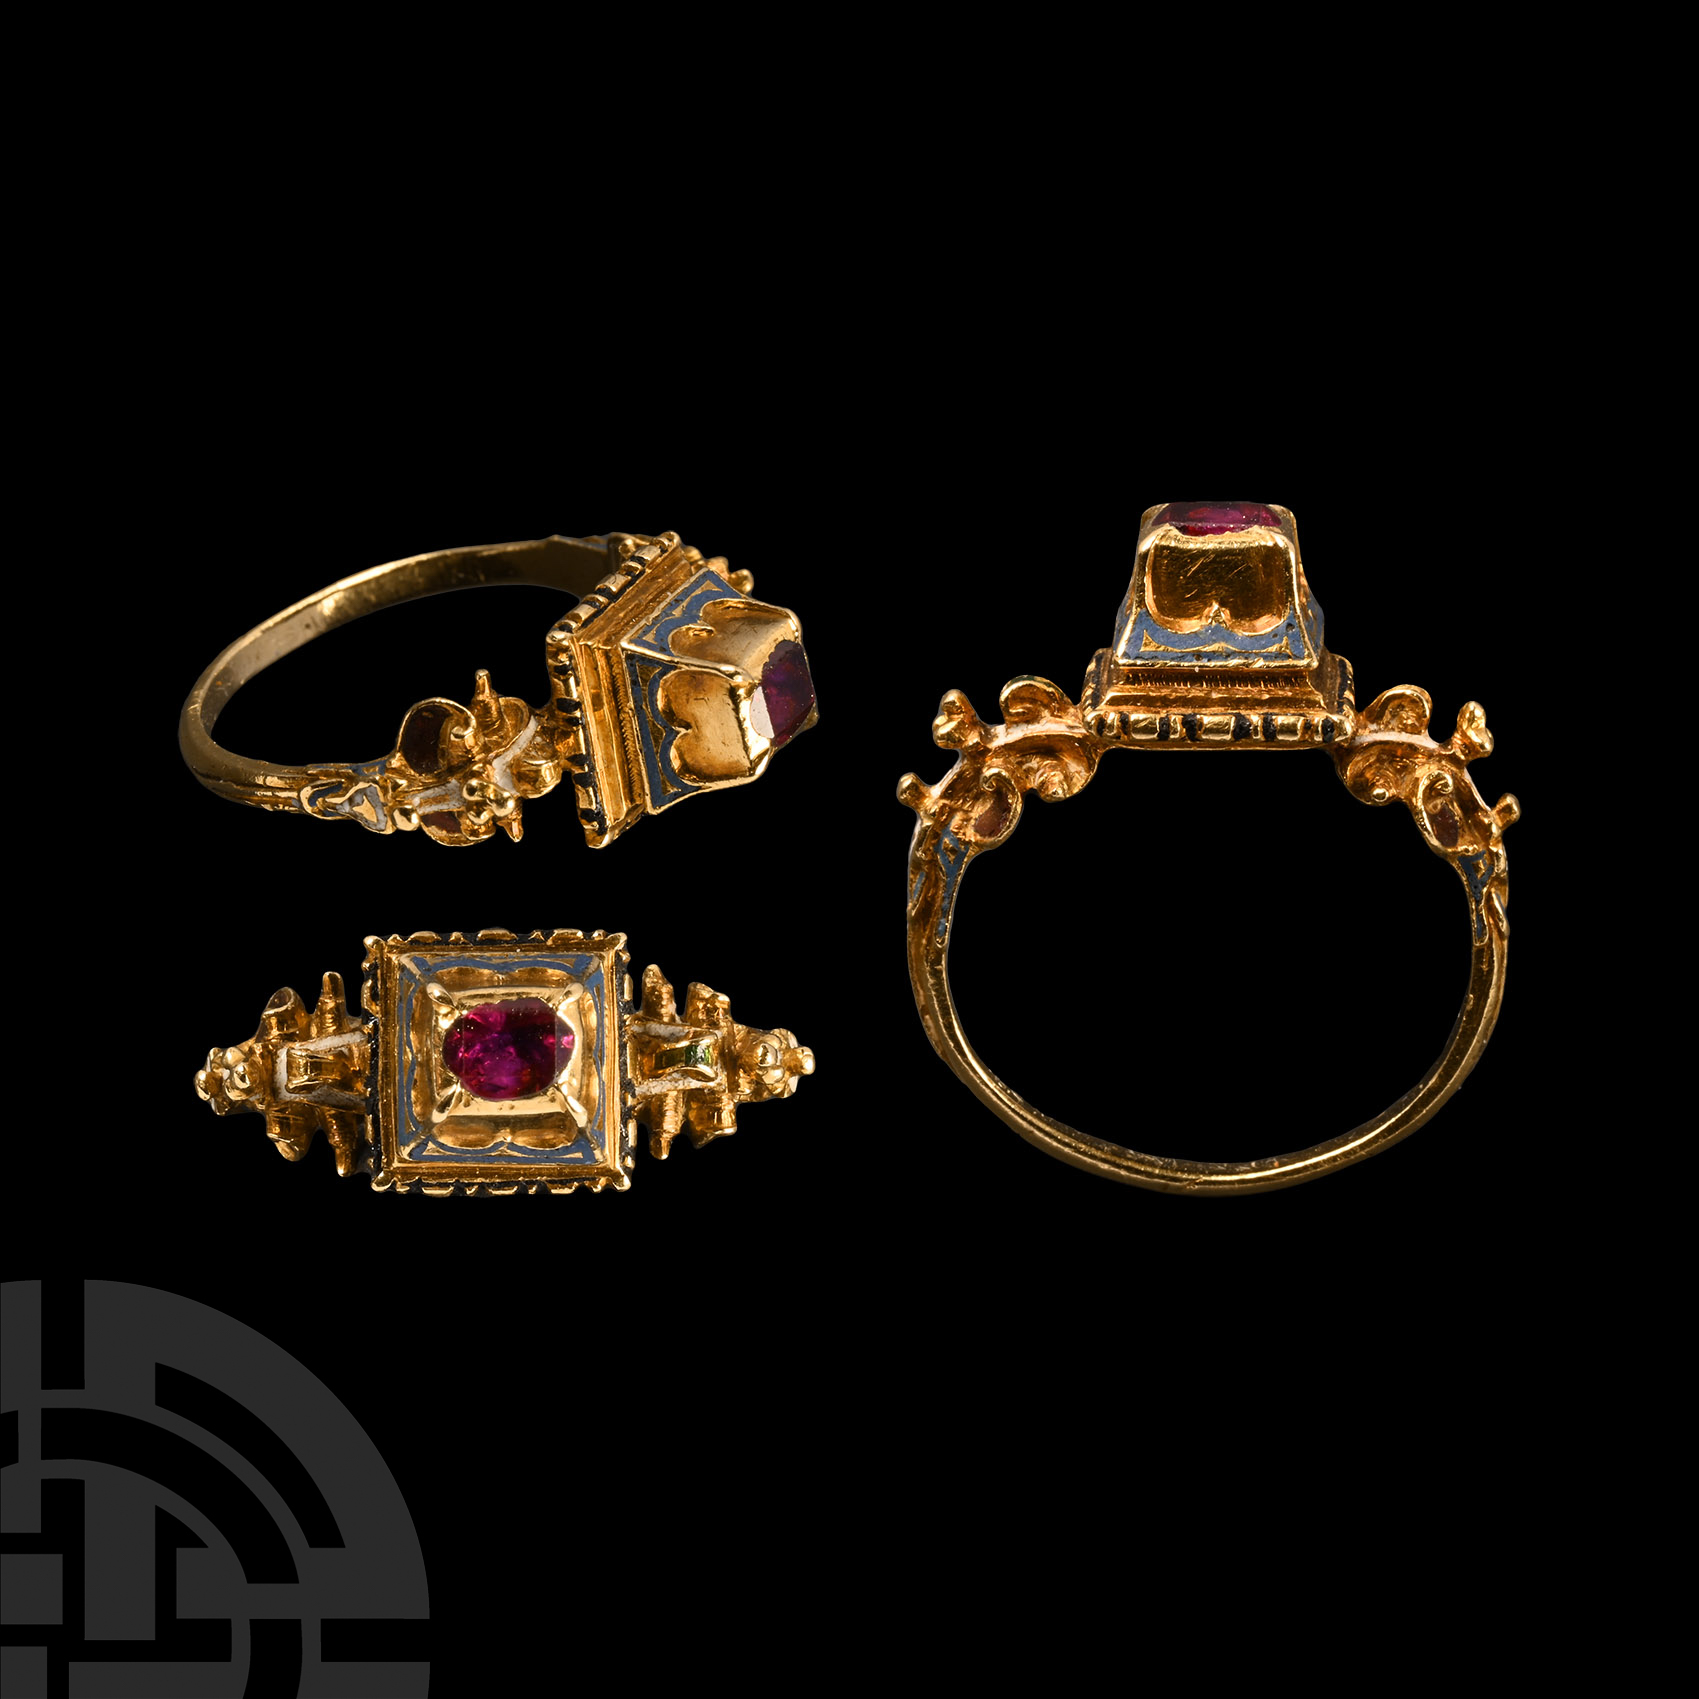 Renaissance Gold Ring with Ruby and Enamelling